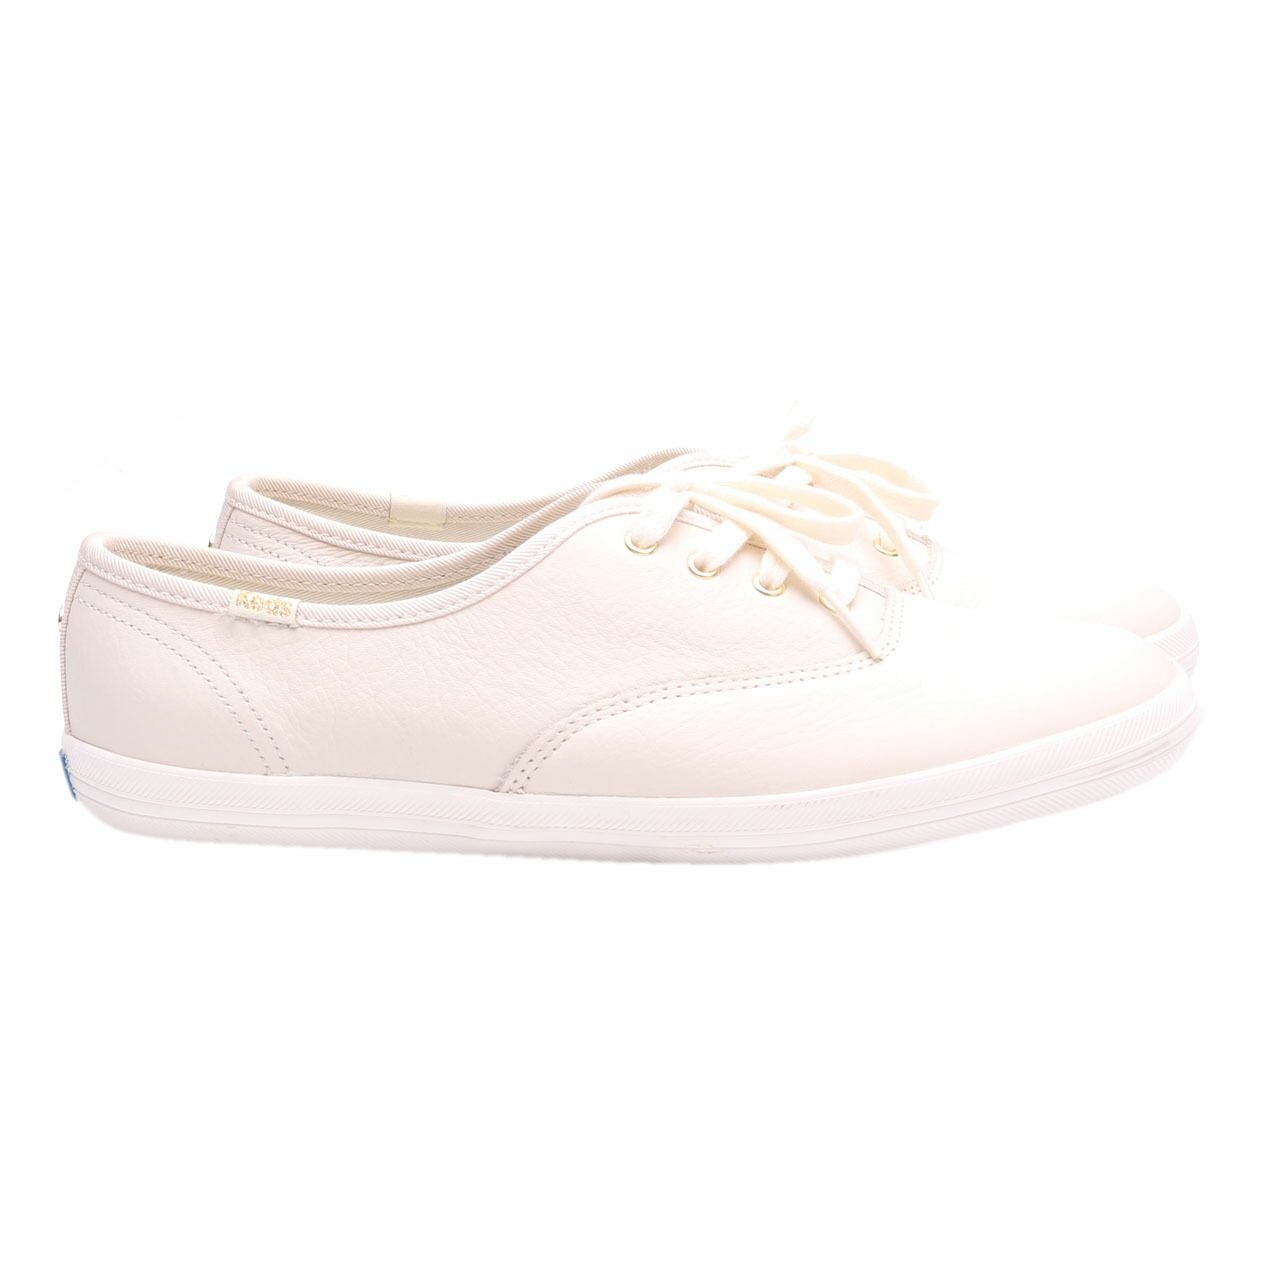 Keds For Kate Spade Cream Leather Sneakers